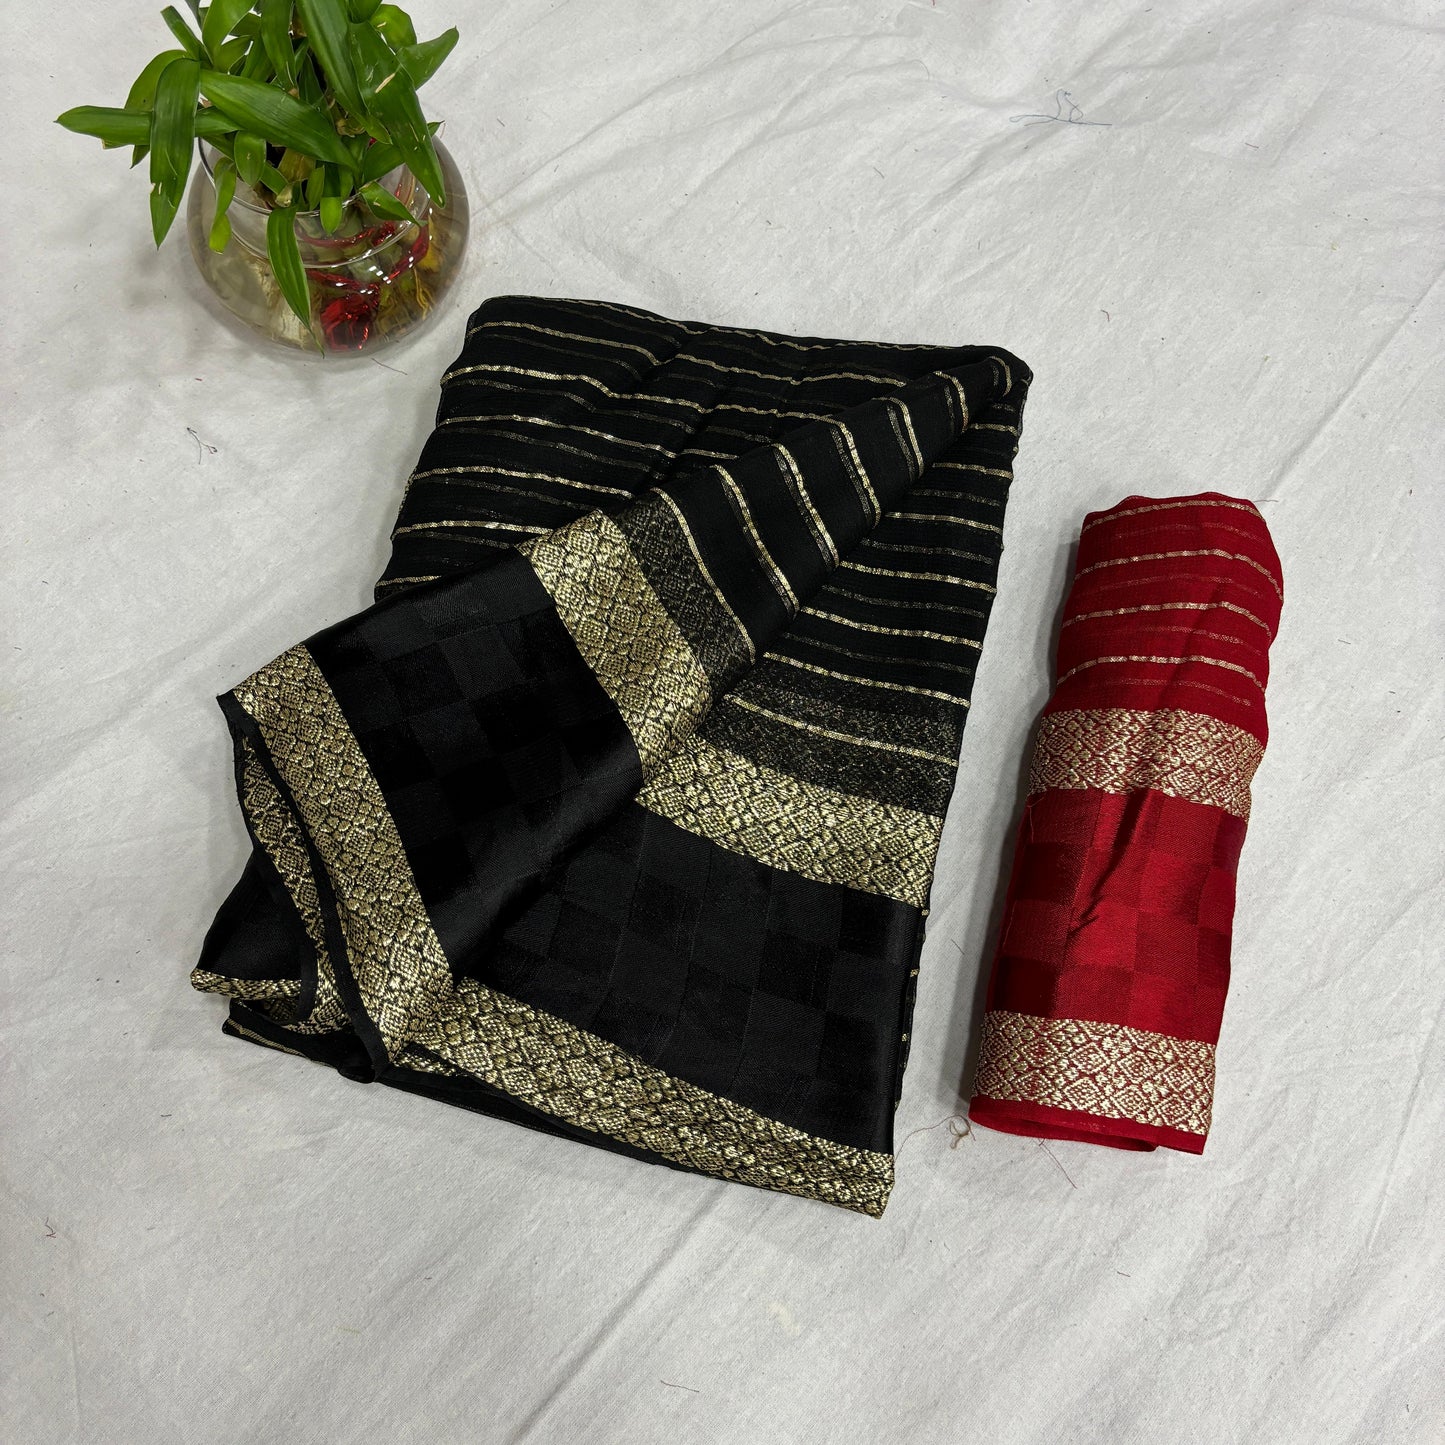 Black Color Pure Viscose Georgette With Self Satin Chex Jacquard Border With Stripes Linning All Over In Body